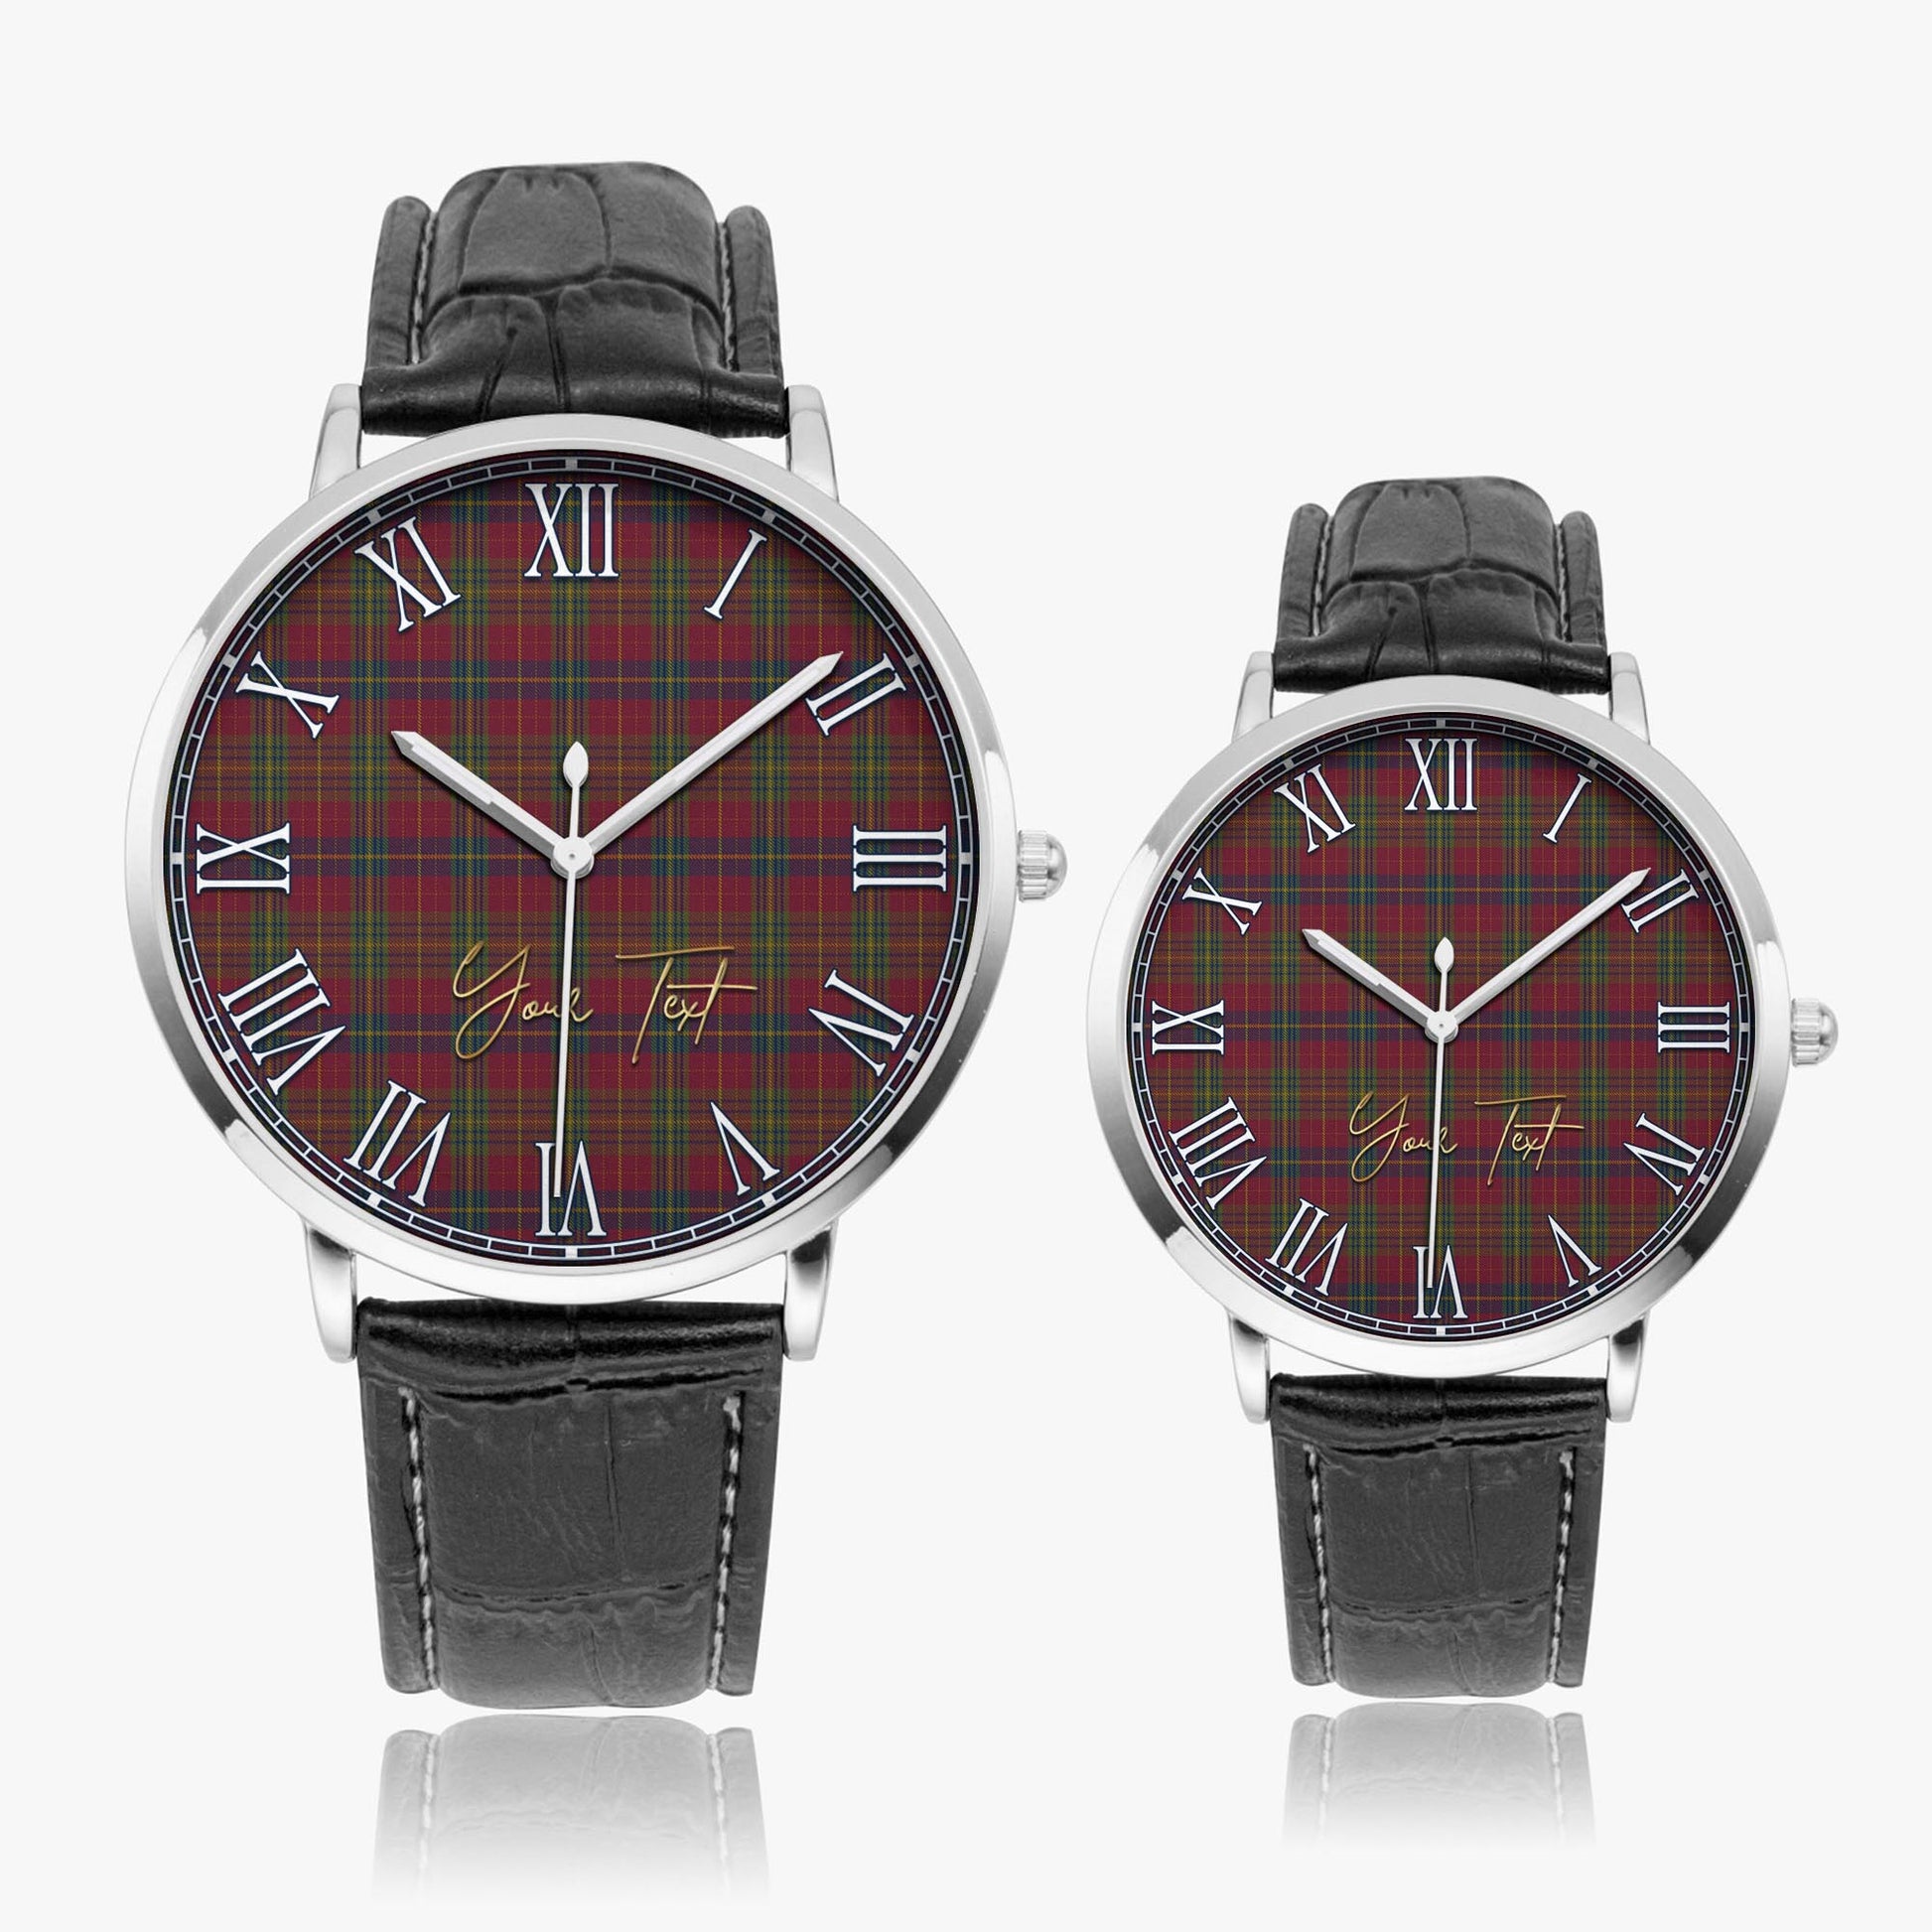 Rice of Wales Tartan Personalized Your Text Leather Trap Quartz Watch Ultra Thin Silver Case With Black Leather Strap - Tartanvibesclothing